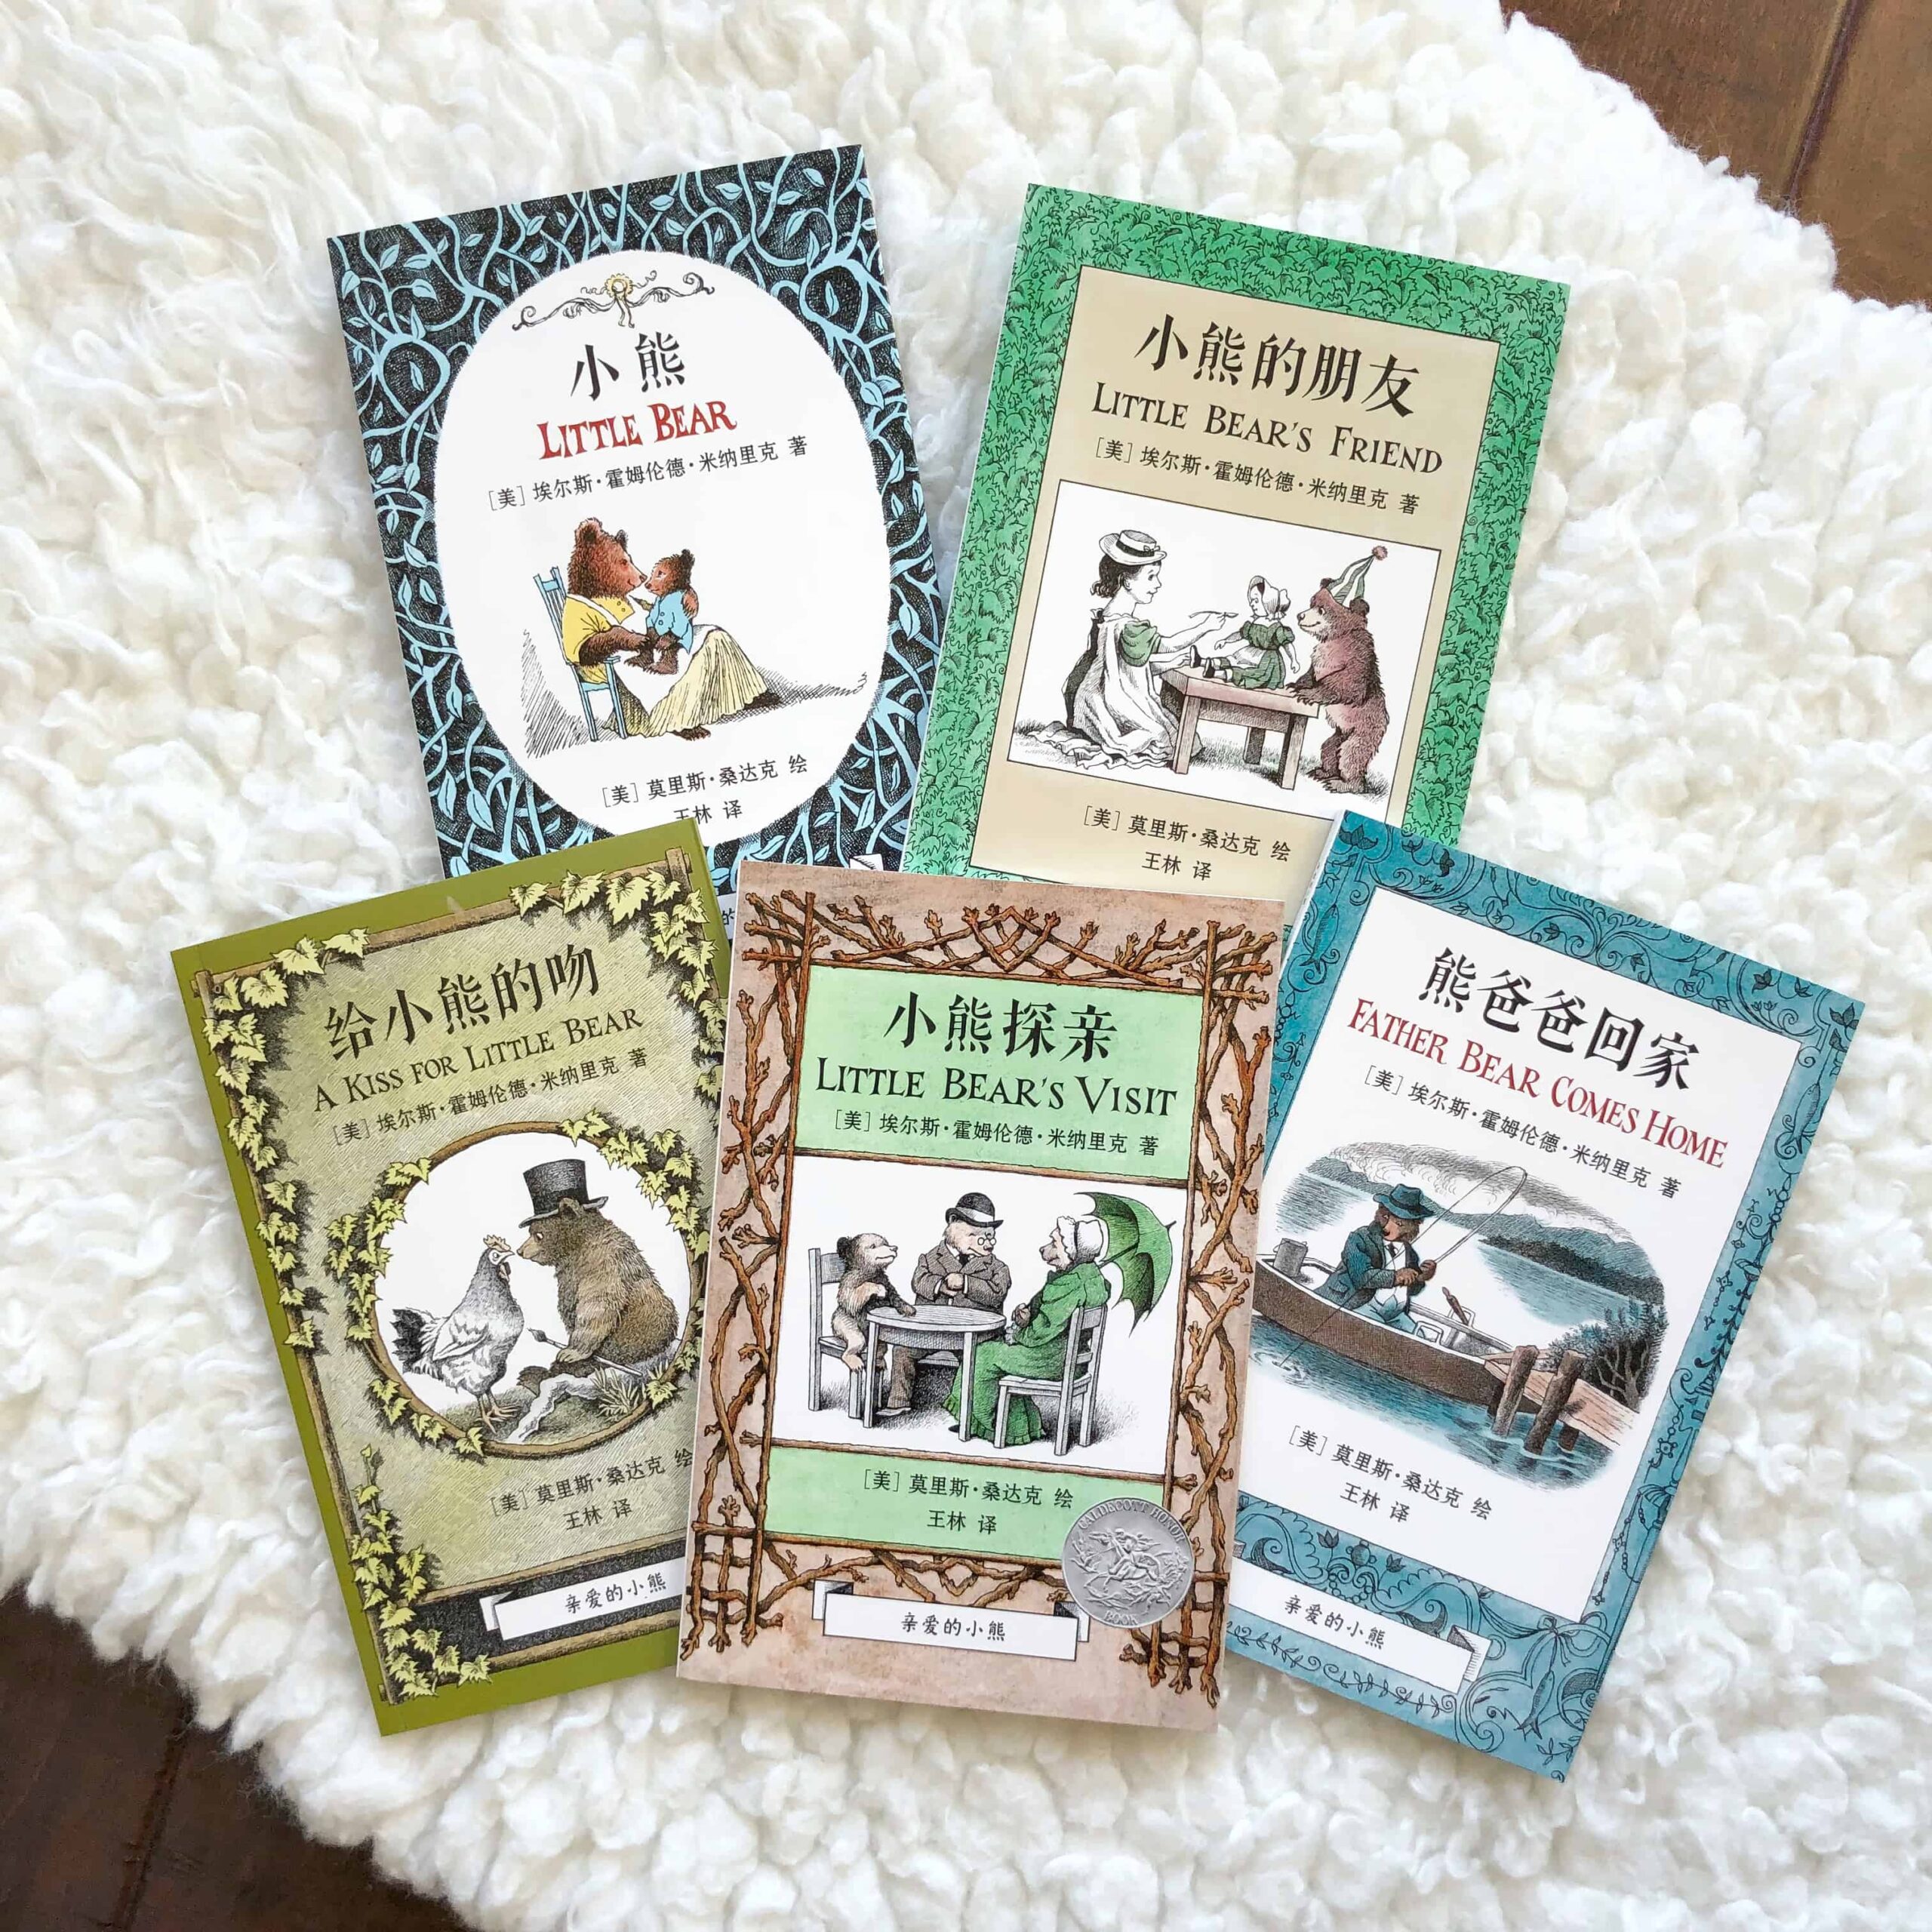 Little Bear Books: Review of Bridge Books in Chinese & English